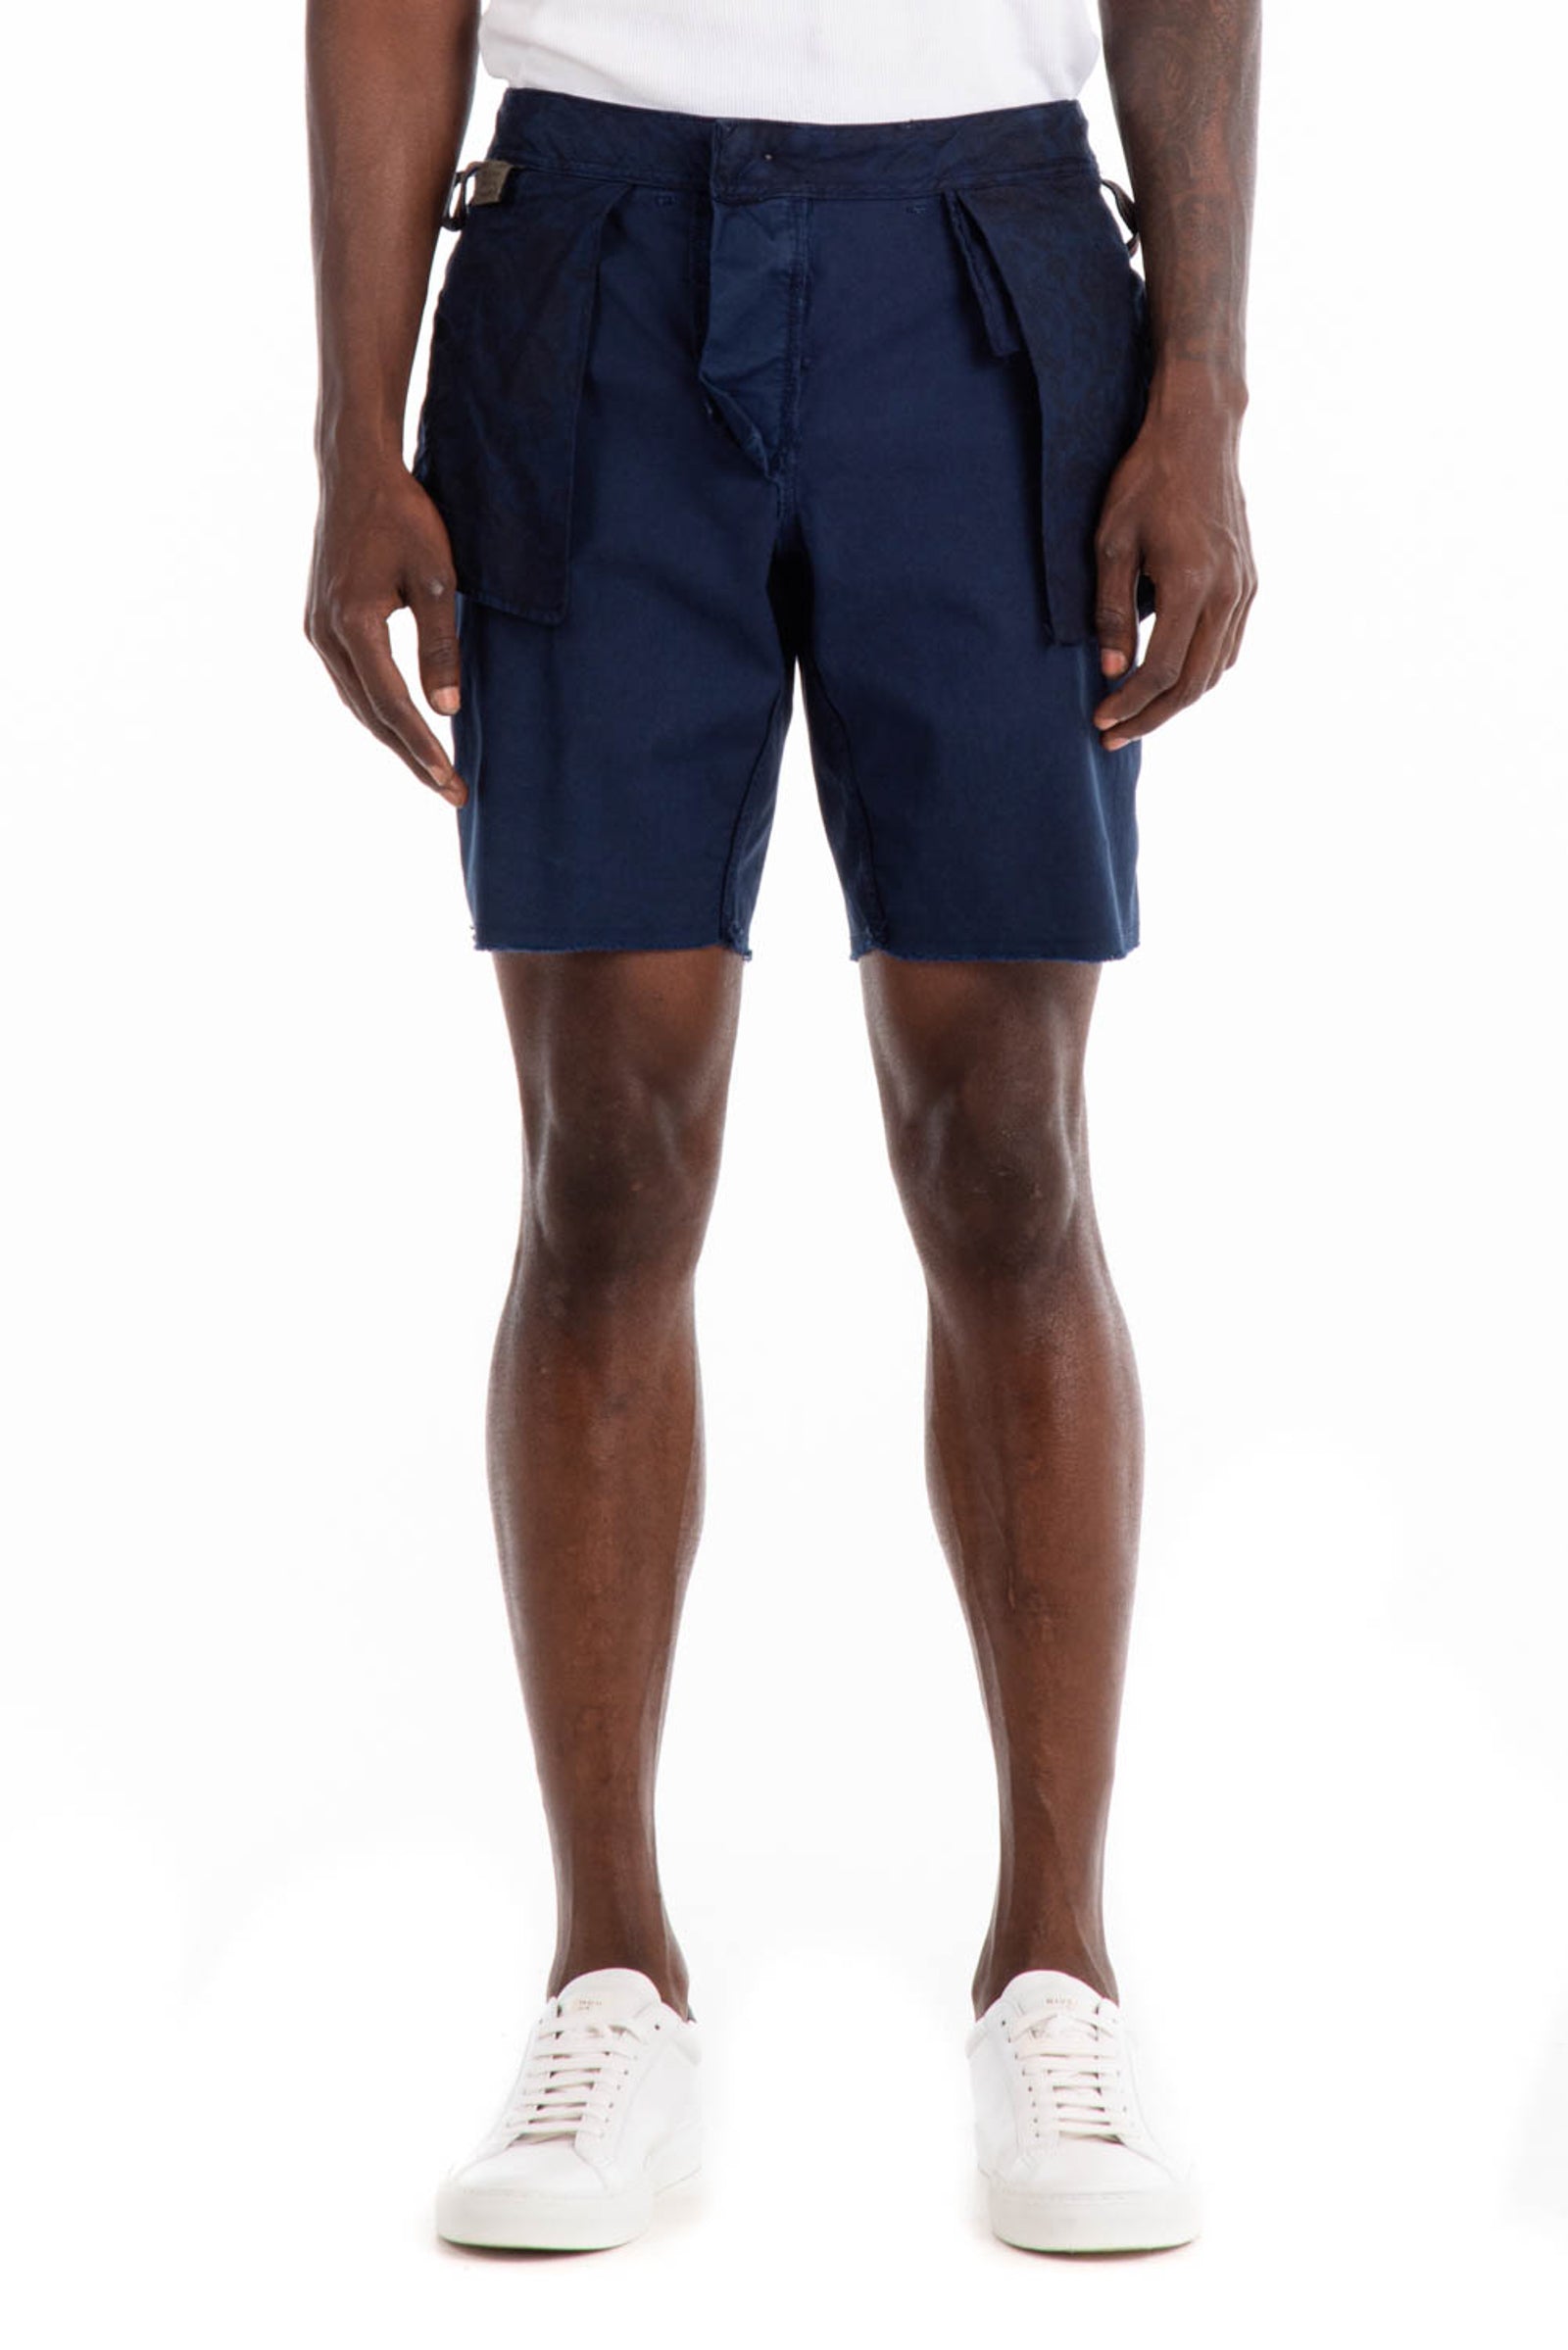 Original Paperbacks Brentwood Chino Short in Navy on Model Cropped Inside Out Pocket Front View